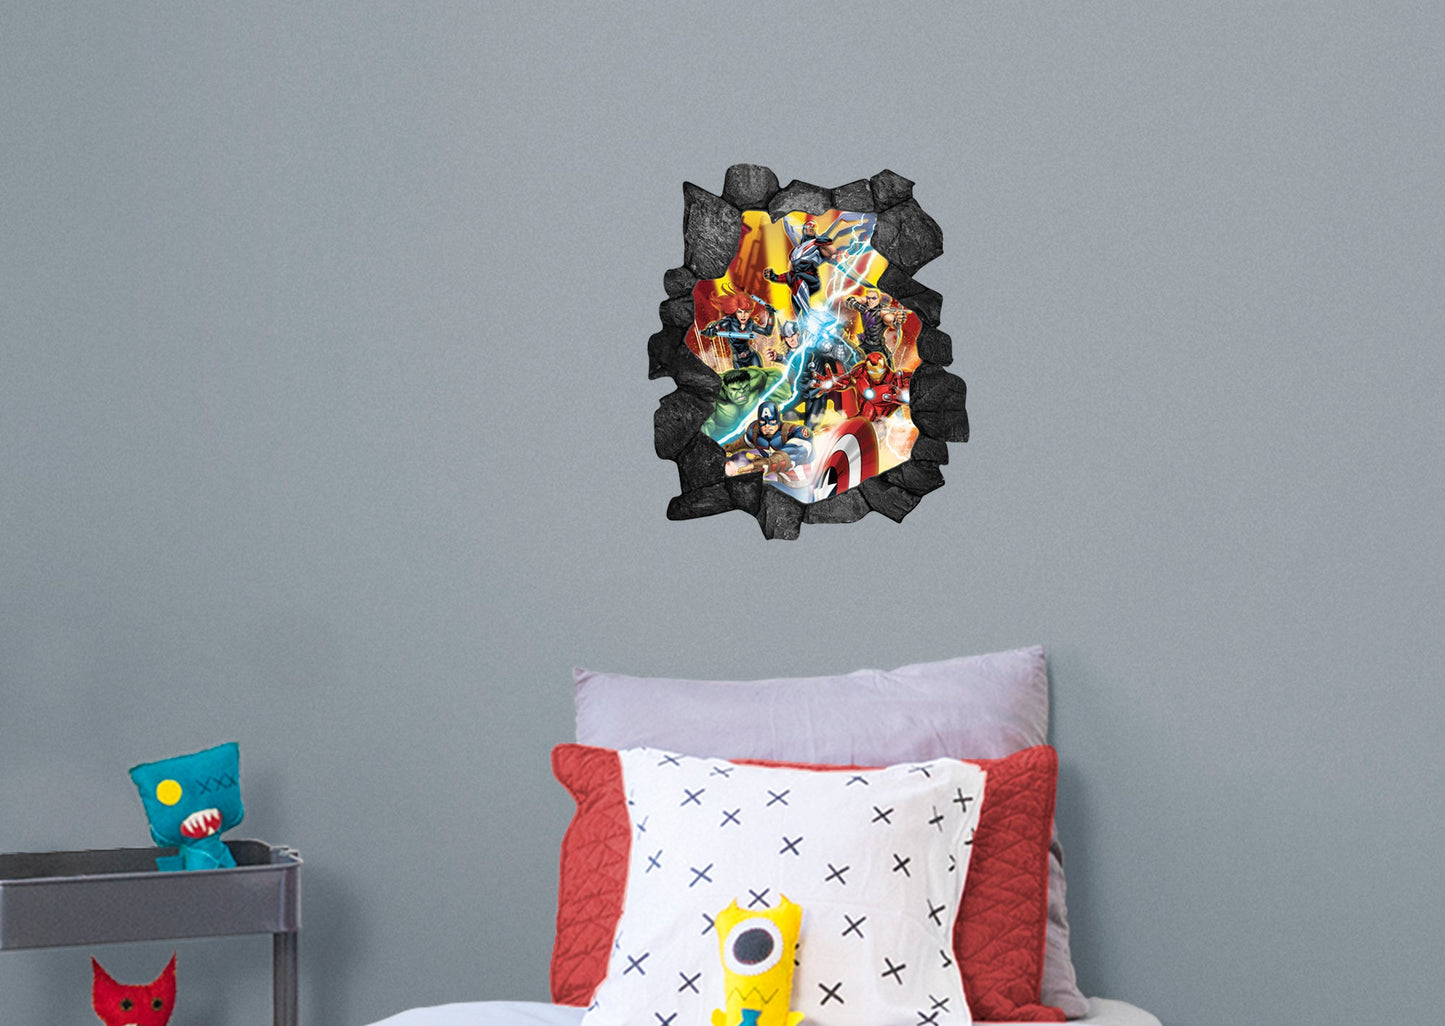 Avengers: Broken Wall 6 Instant Window - Officially Licensed Marvel Removable Adhesive Decal